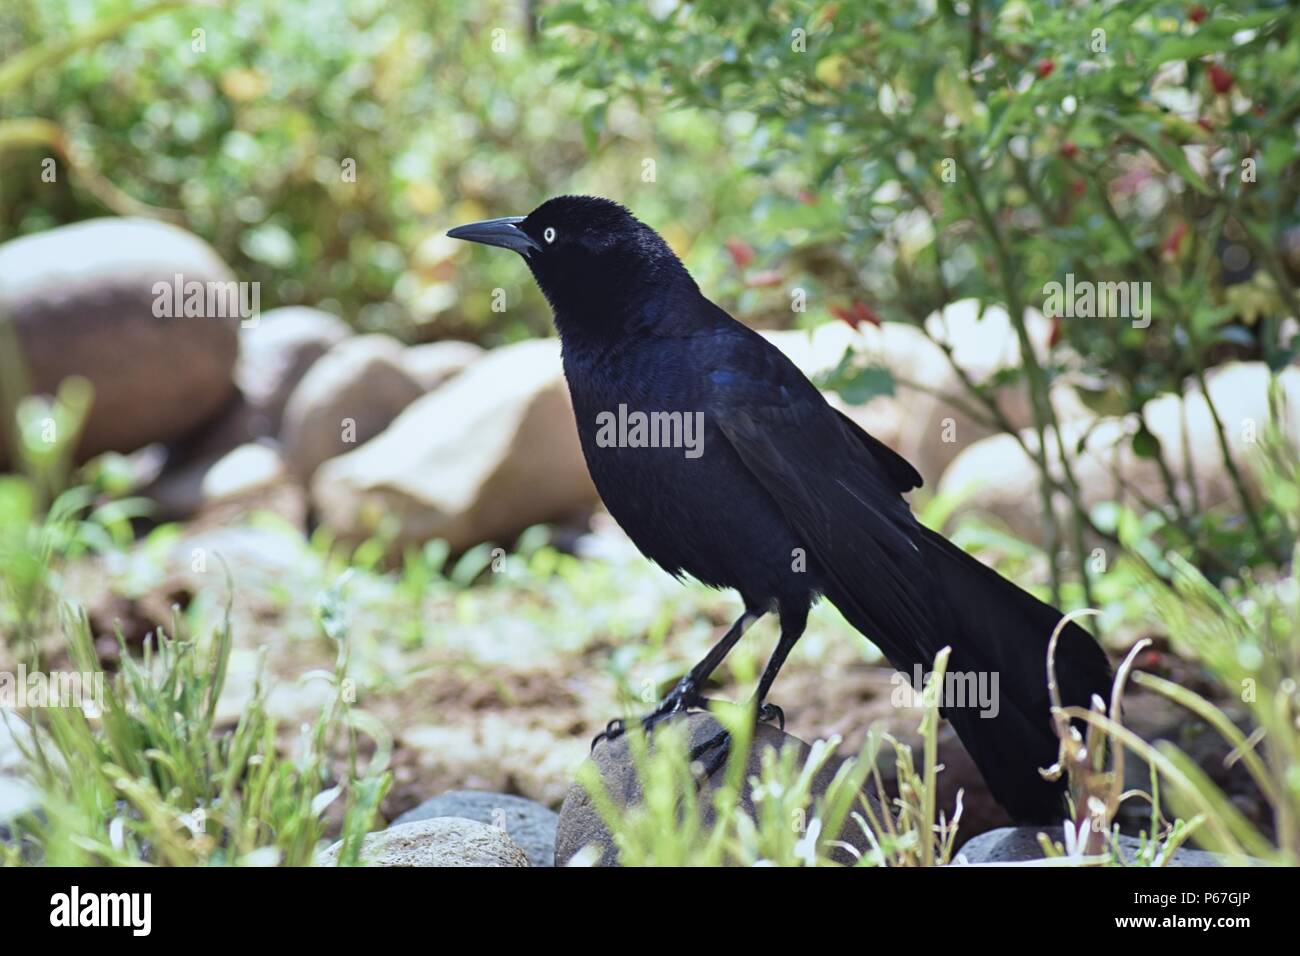 Great-tailed Grackle bird close up in Puerto Vallarta Mexico Stock Photo -  Alamy